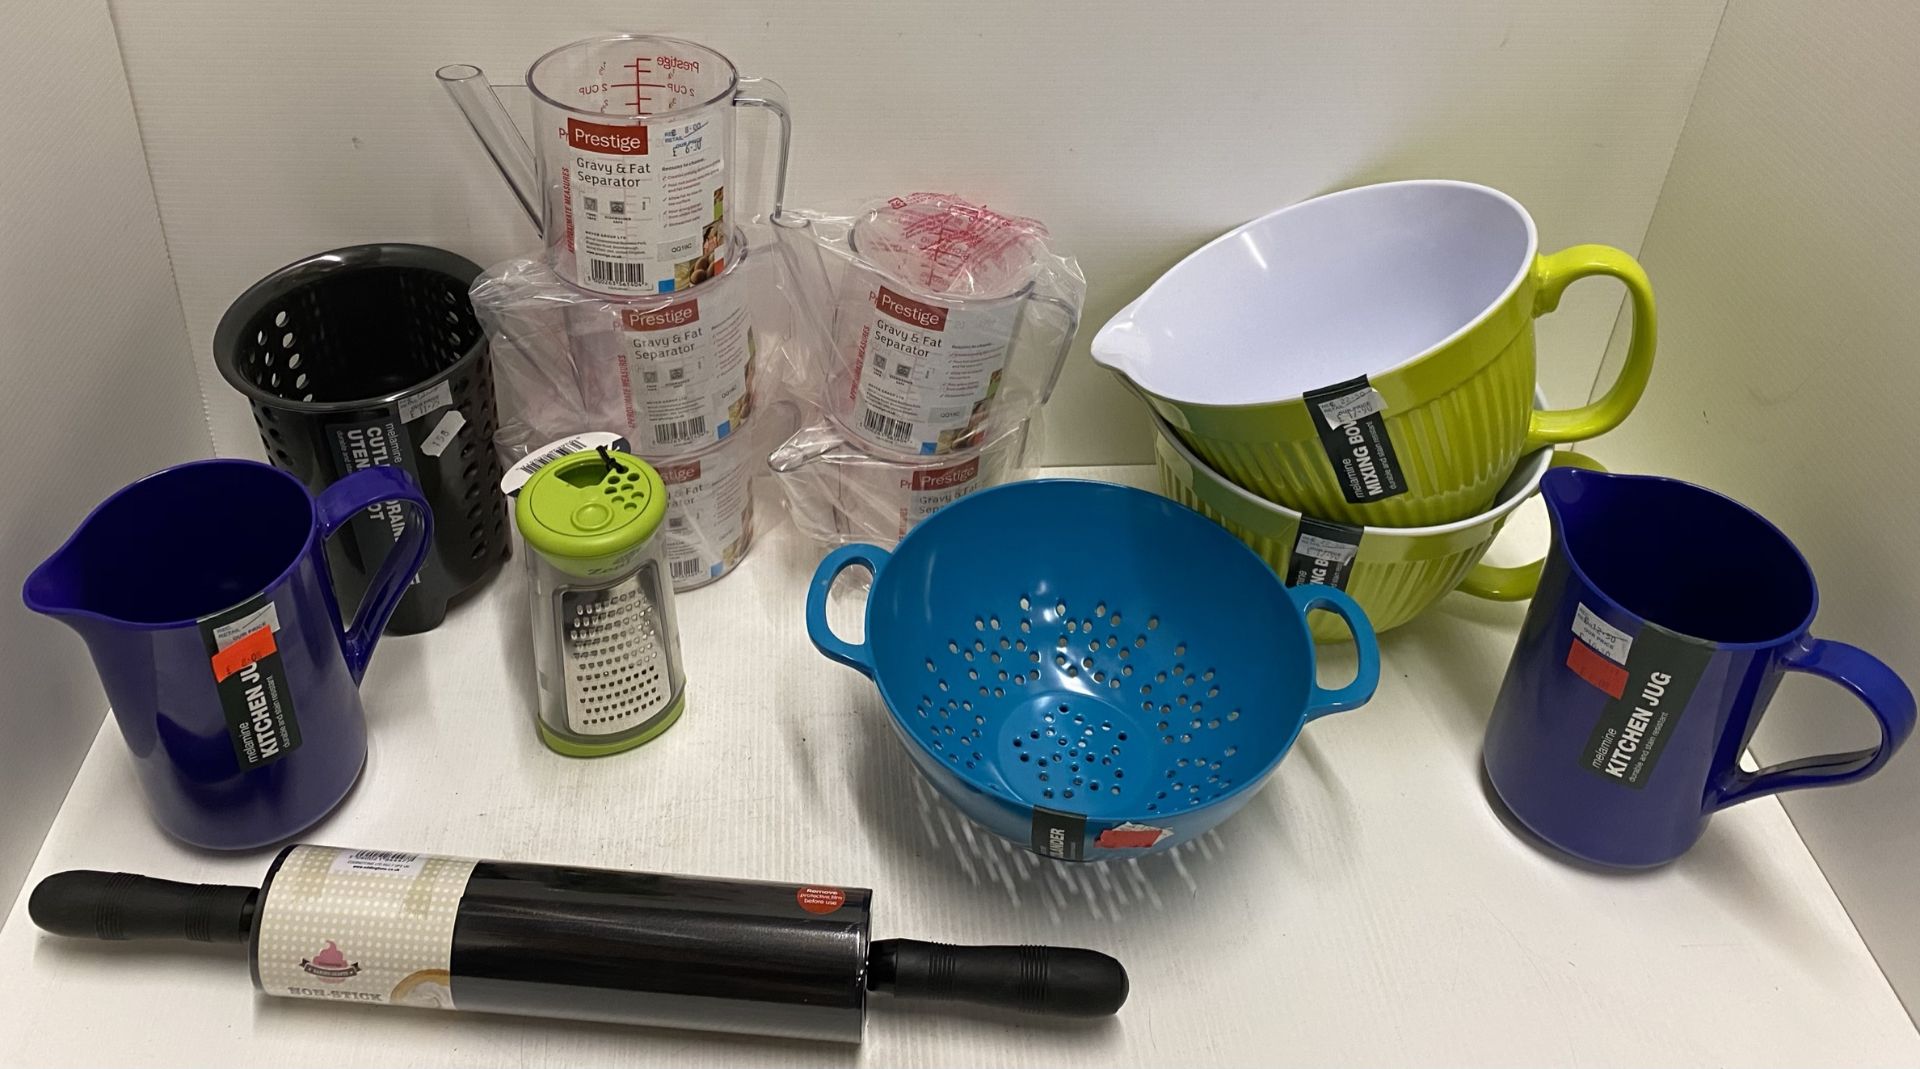 13 x assorted items - Zeal melamine mixing bowls, jugs and colanders, non stick rolling pin,